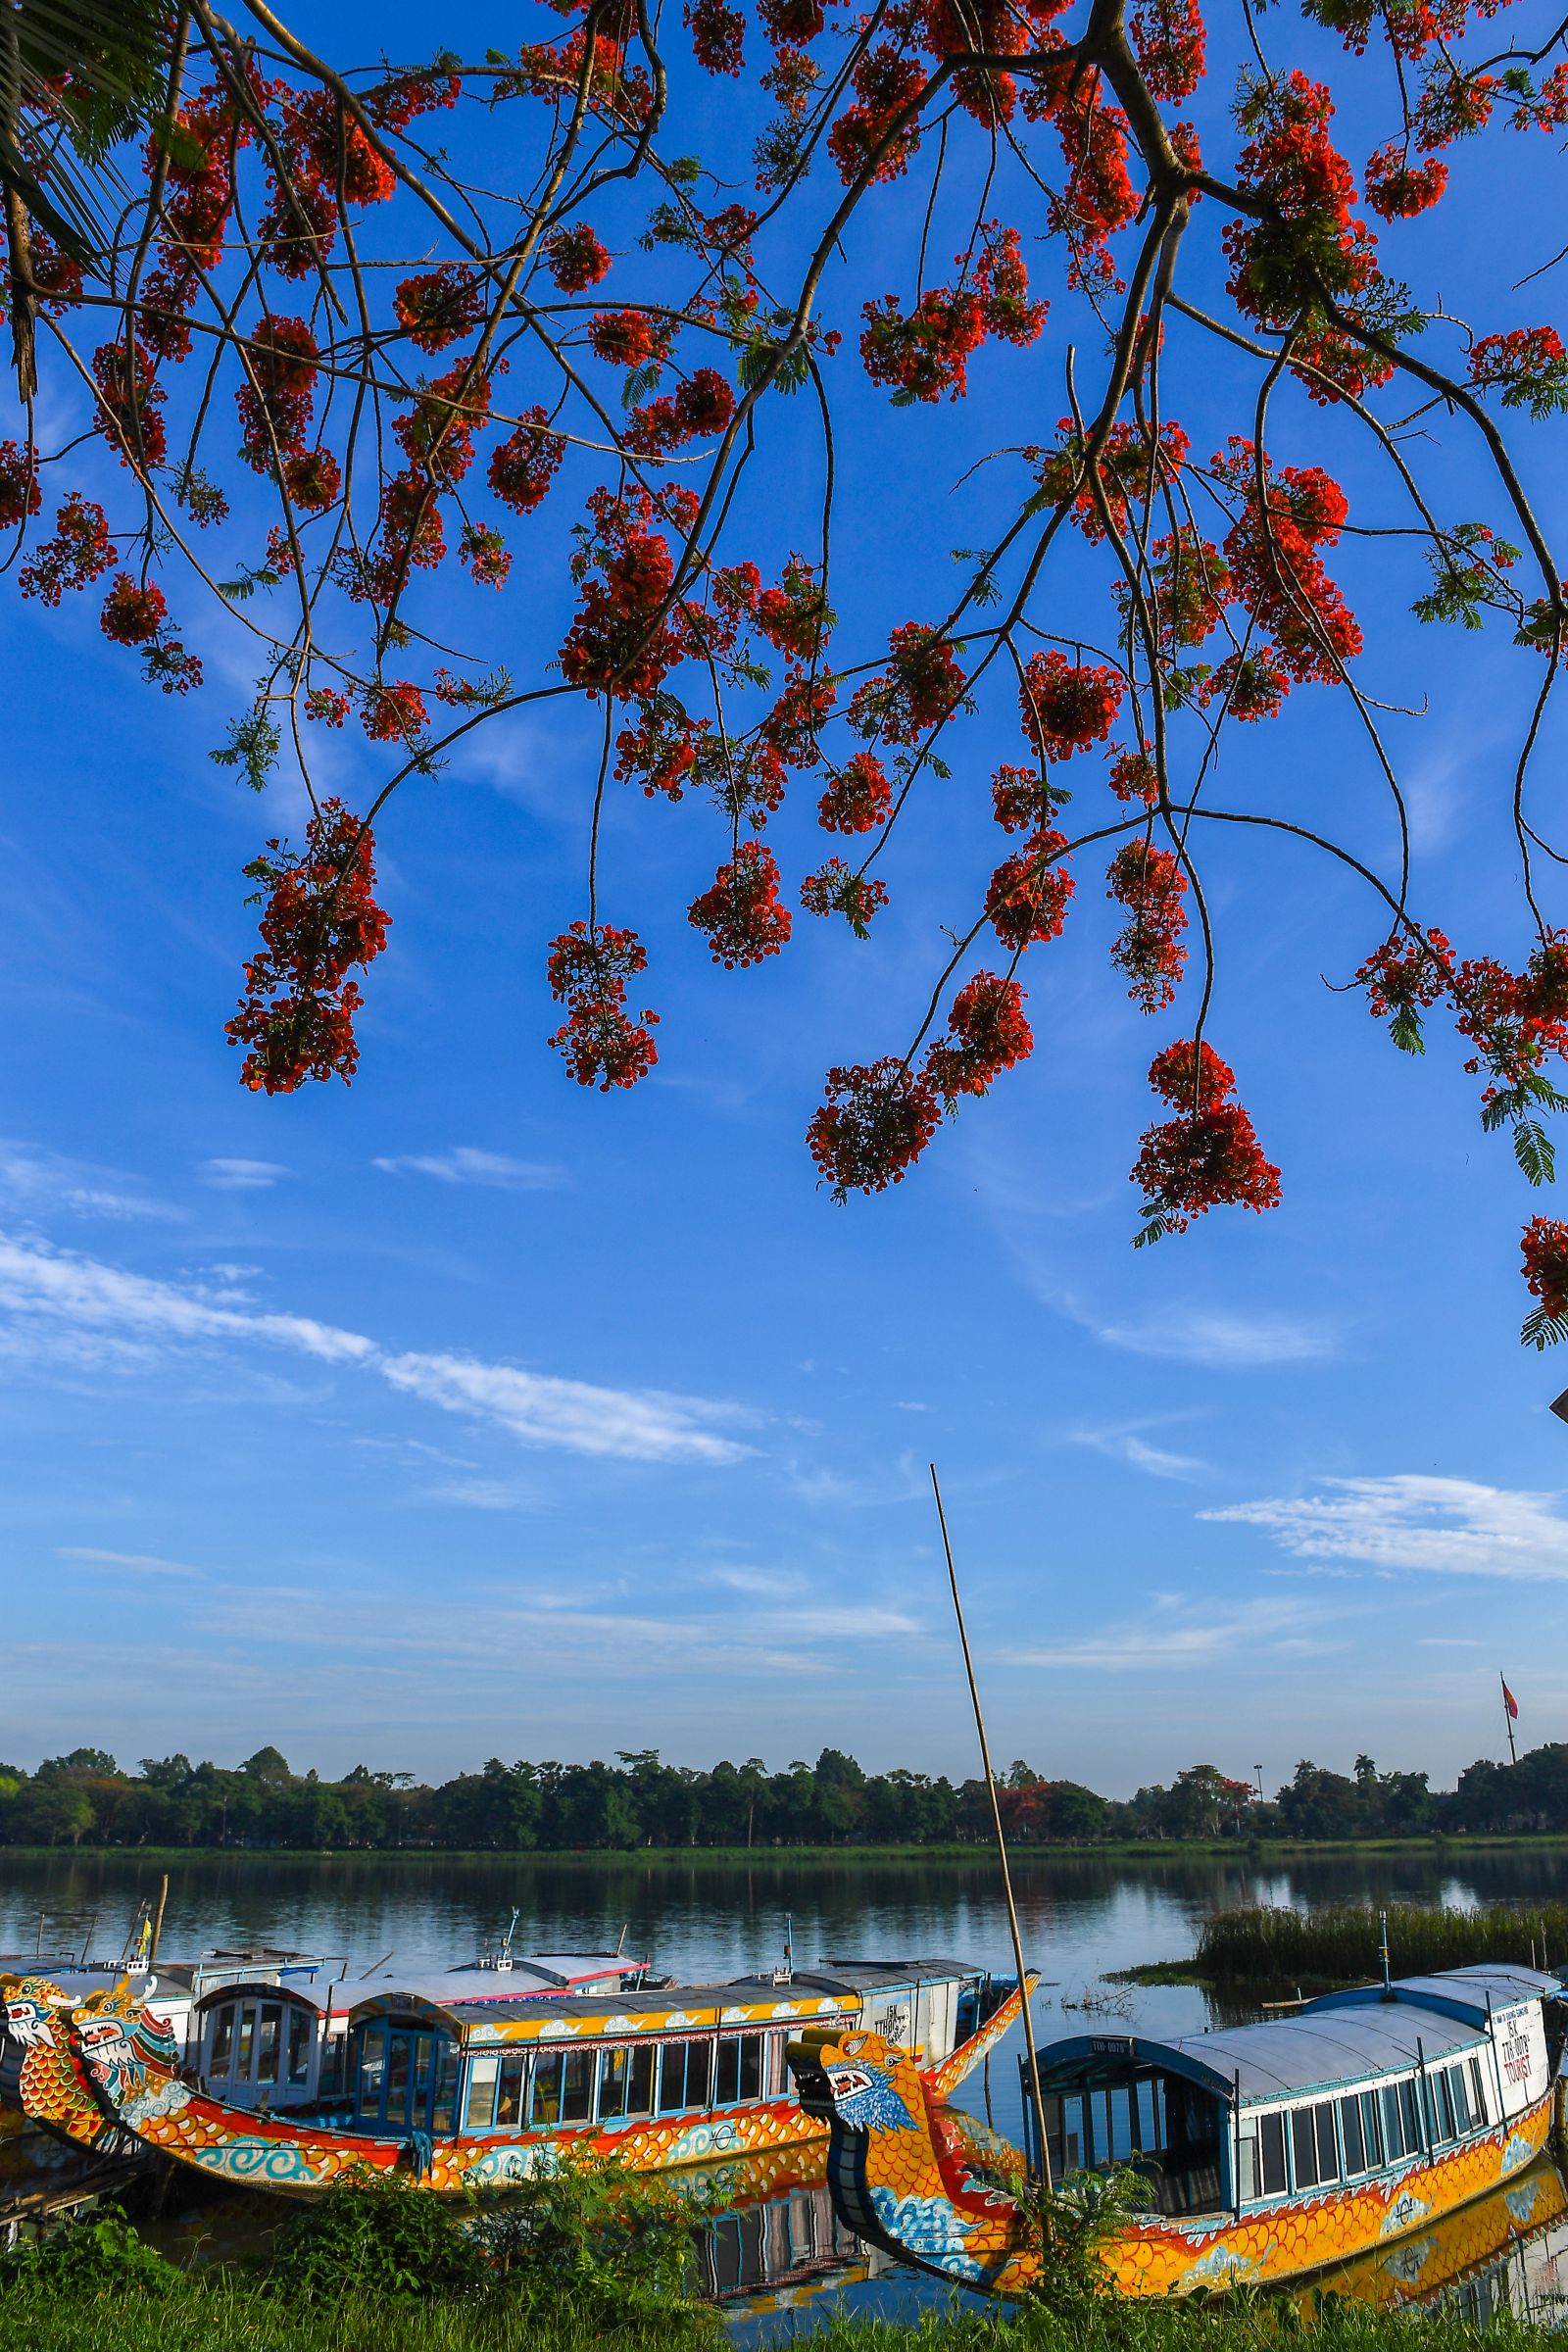 Flamboyant flowers by the Huong River